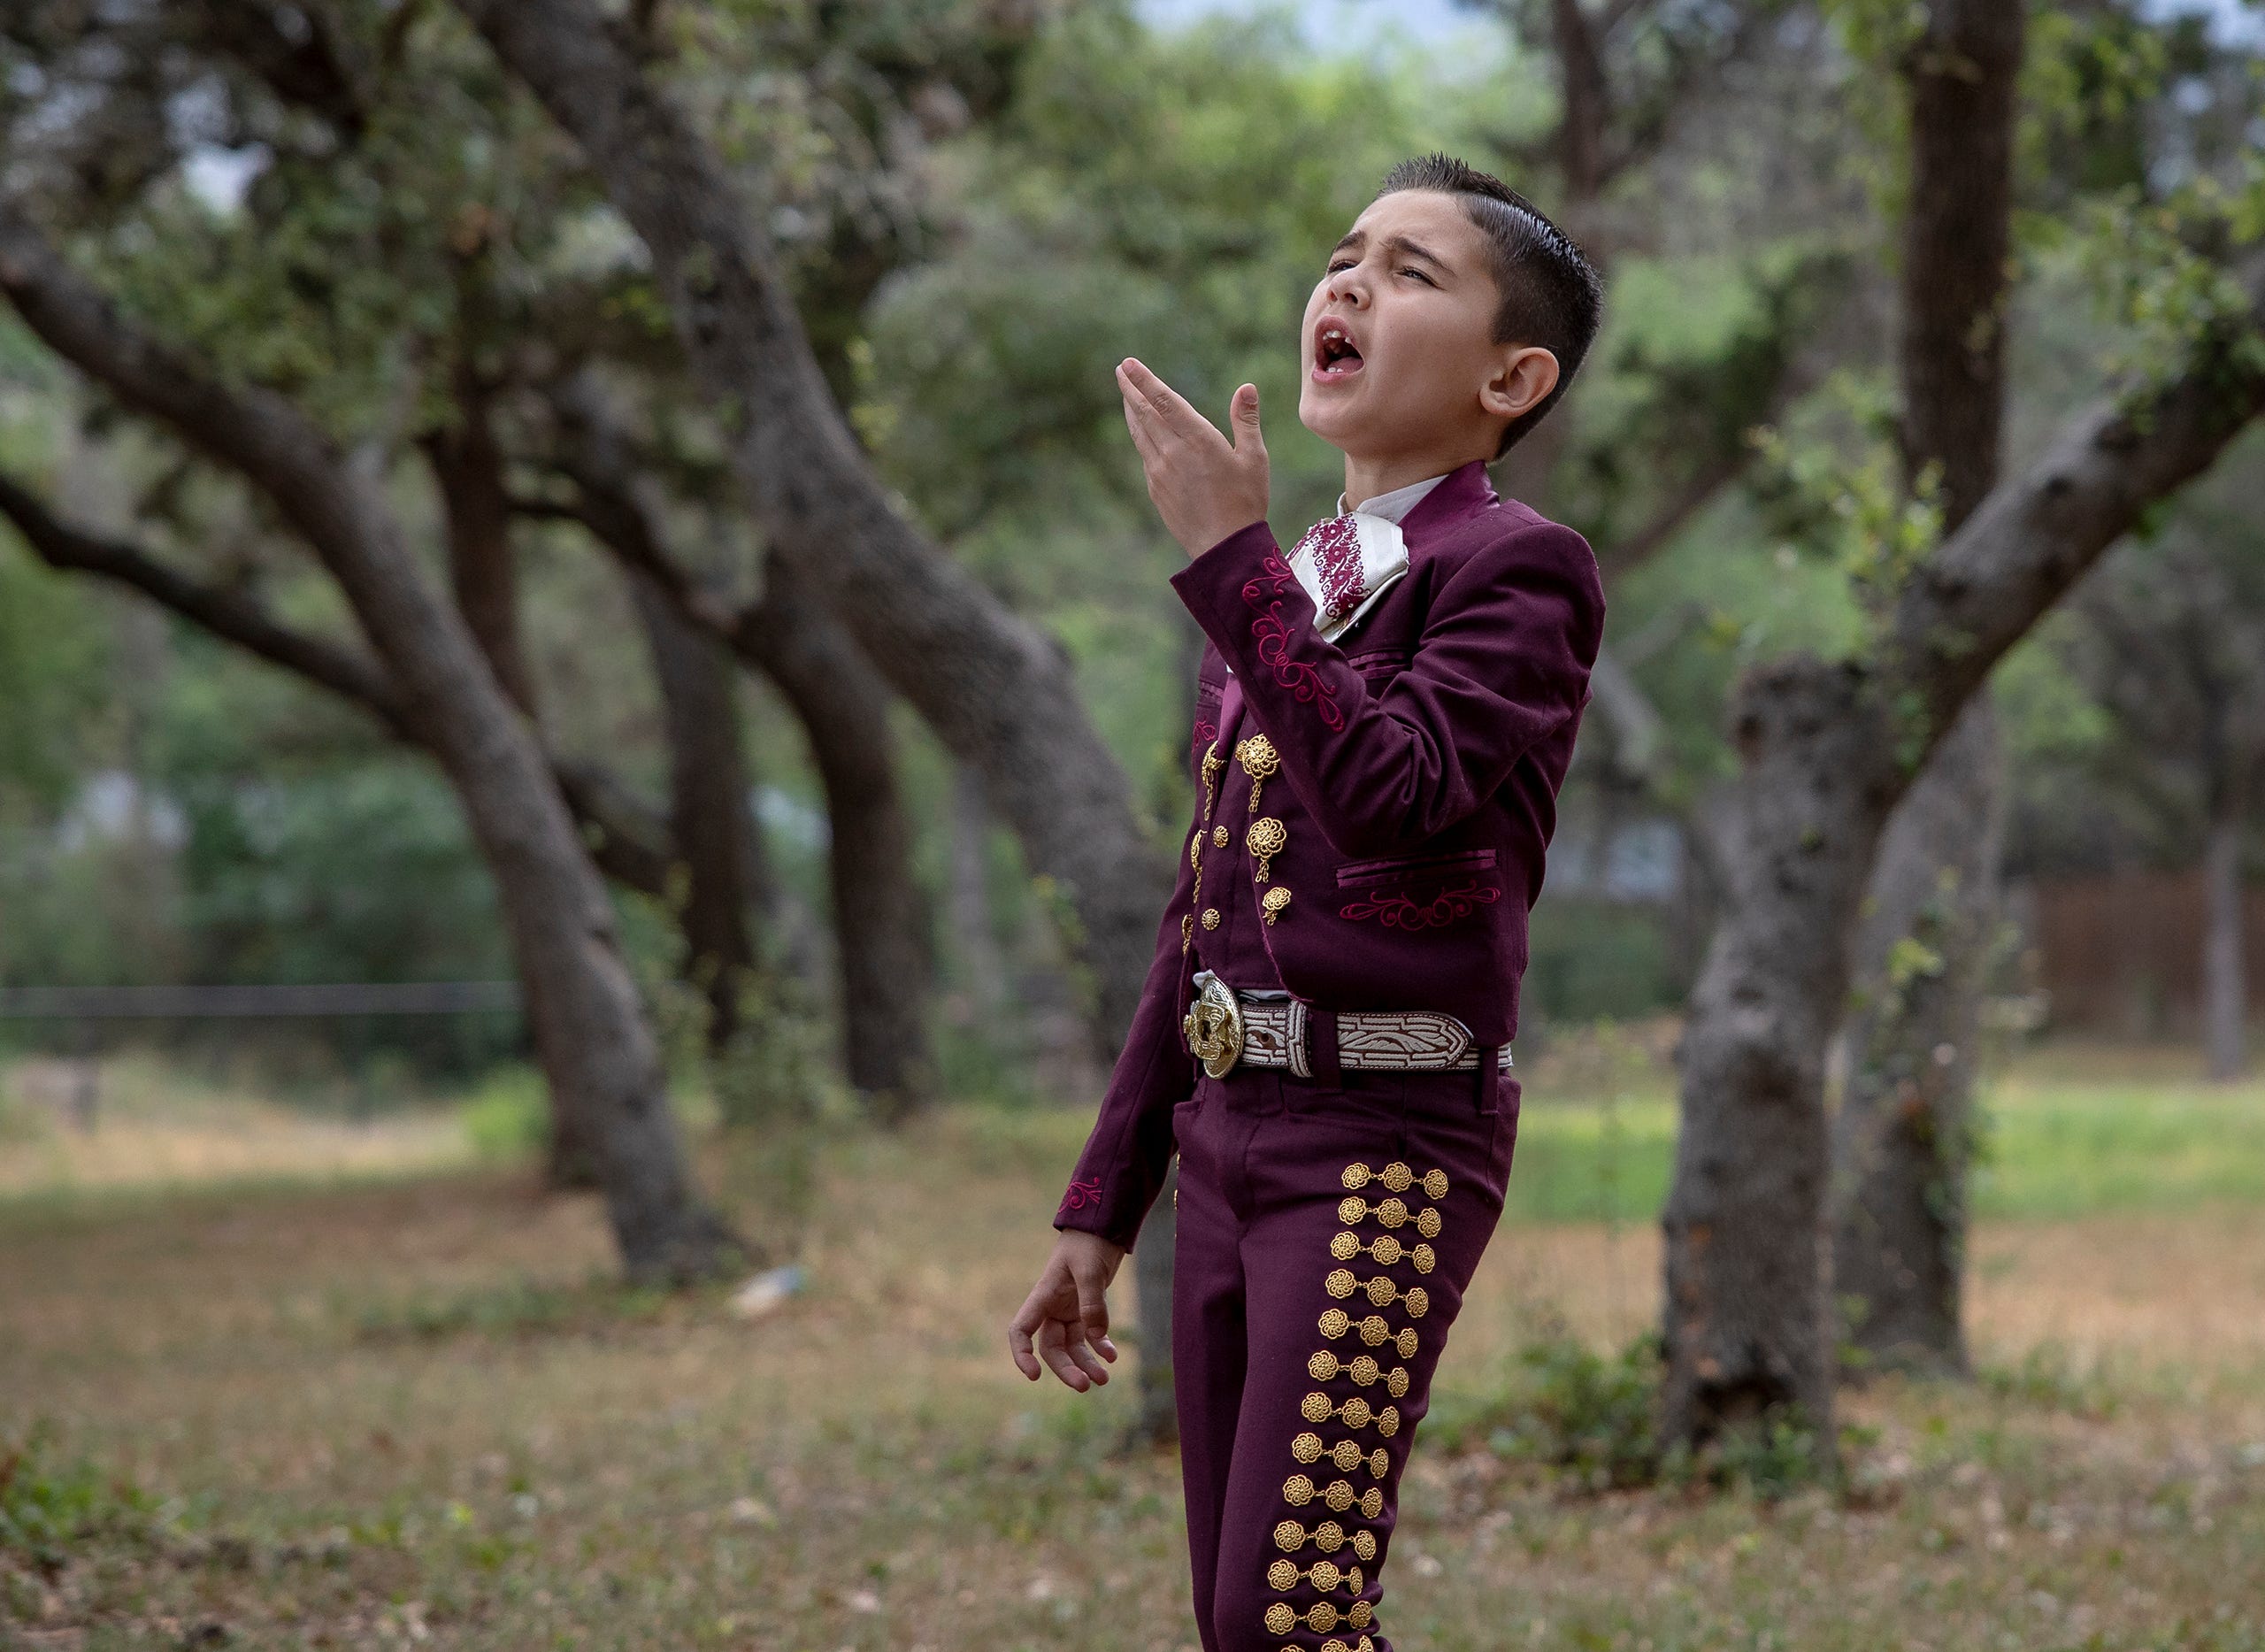 Mateo Lopez, world's youngest mariachi, has music in his blood